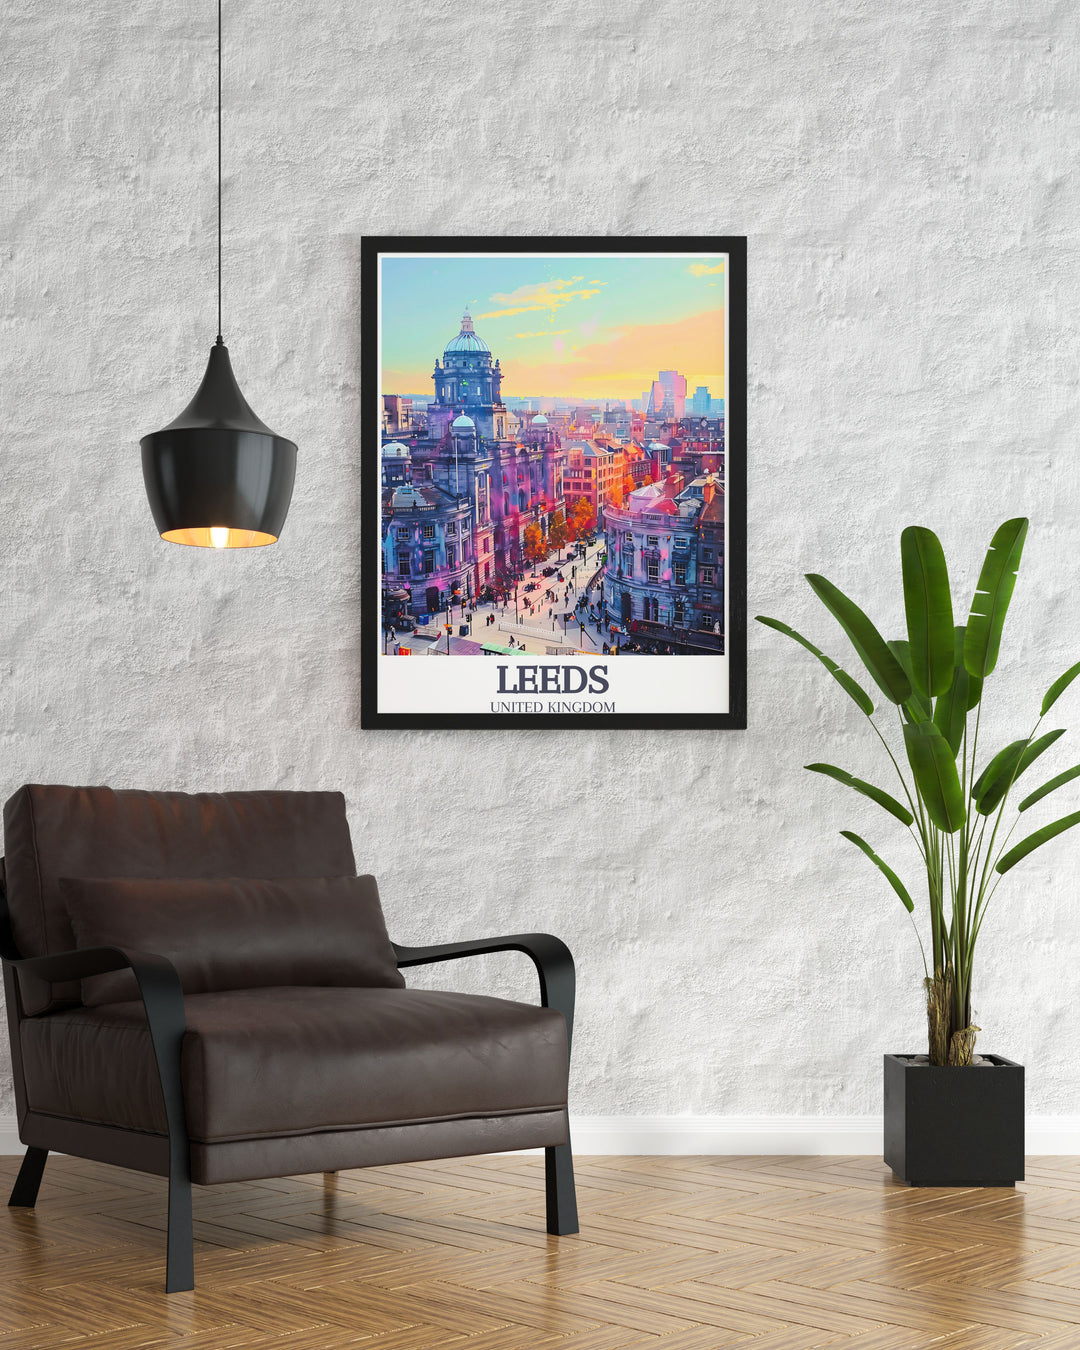 Beautiful Leeds Corn Exchange and Briggate High Street print highlighting the rich history and cultural significance of Leeds. Ideal for enhancing your England wall decor and creating a focal point in your living space with Leeds Corn Exchange artwork.